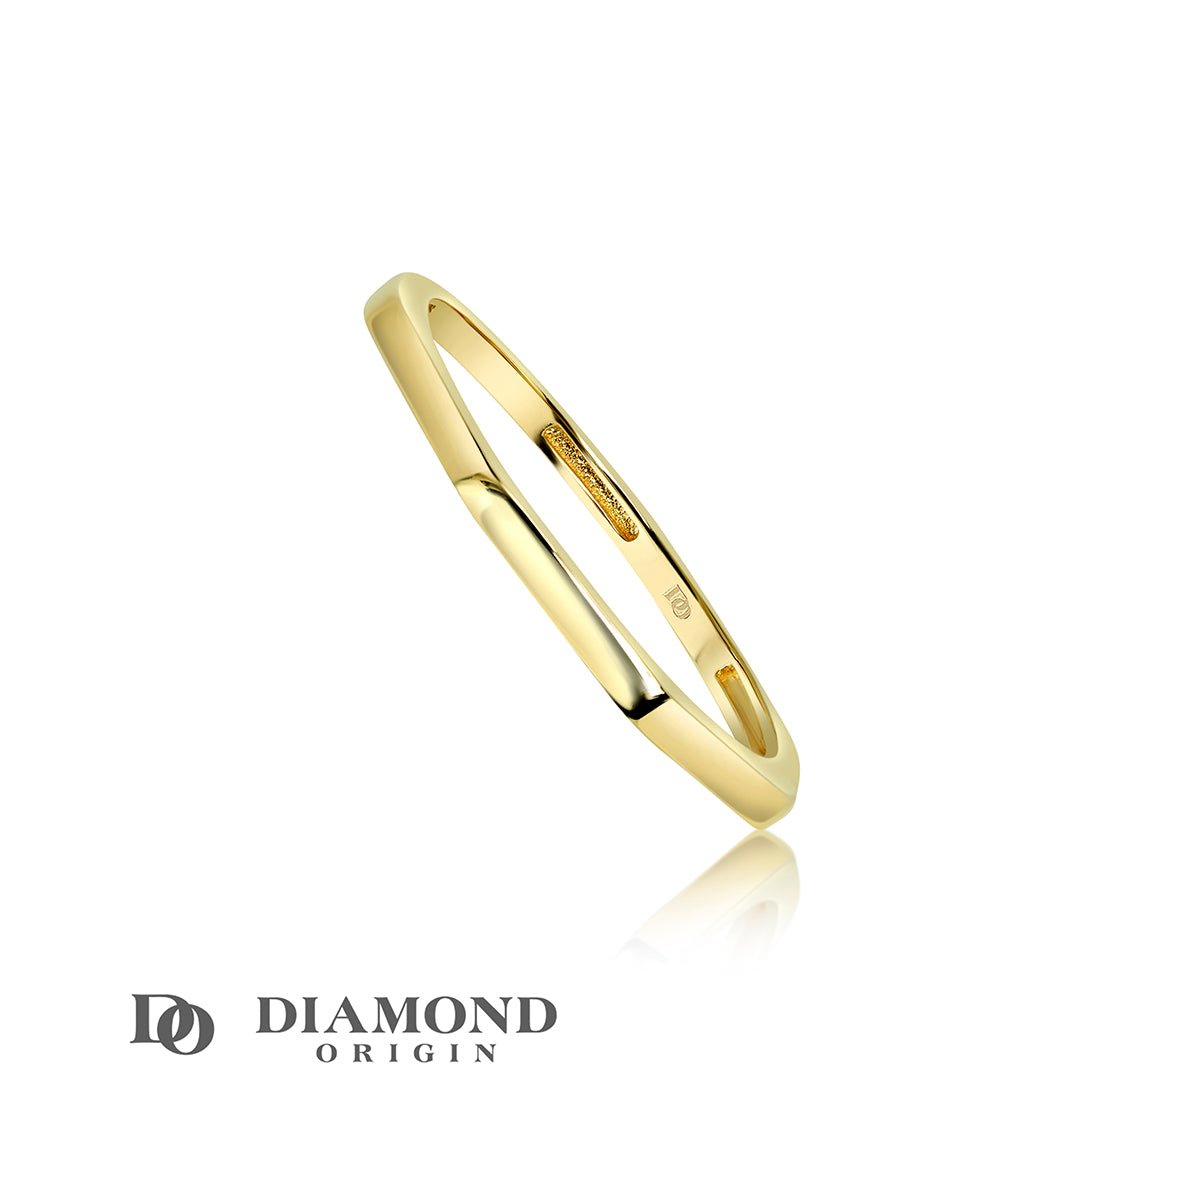 But it's not just about the looks. This ring has versatility too. It's bold enough to wear on its own for a clean, minimalist statement. But if you're feeling a bit adventurous, it's also perfect for stacking with other rings to create an eclectic, personalized look.